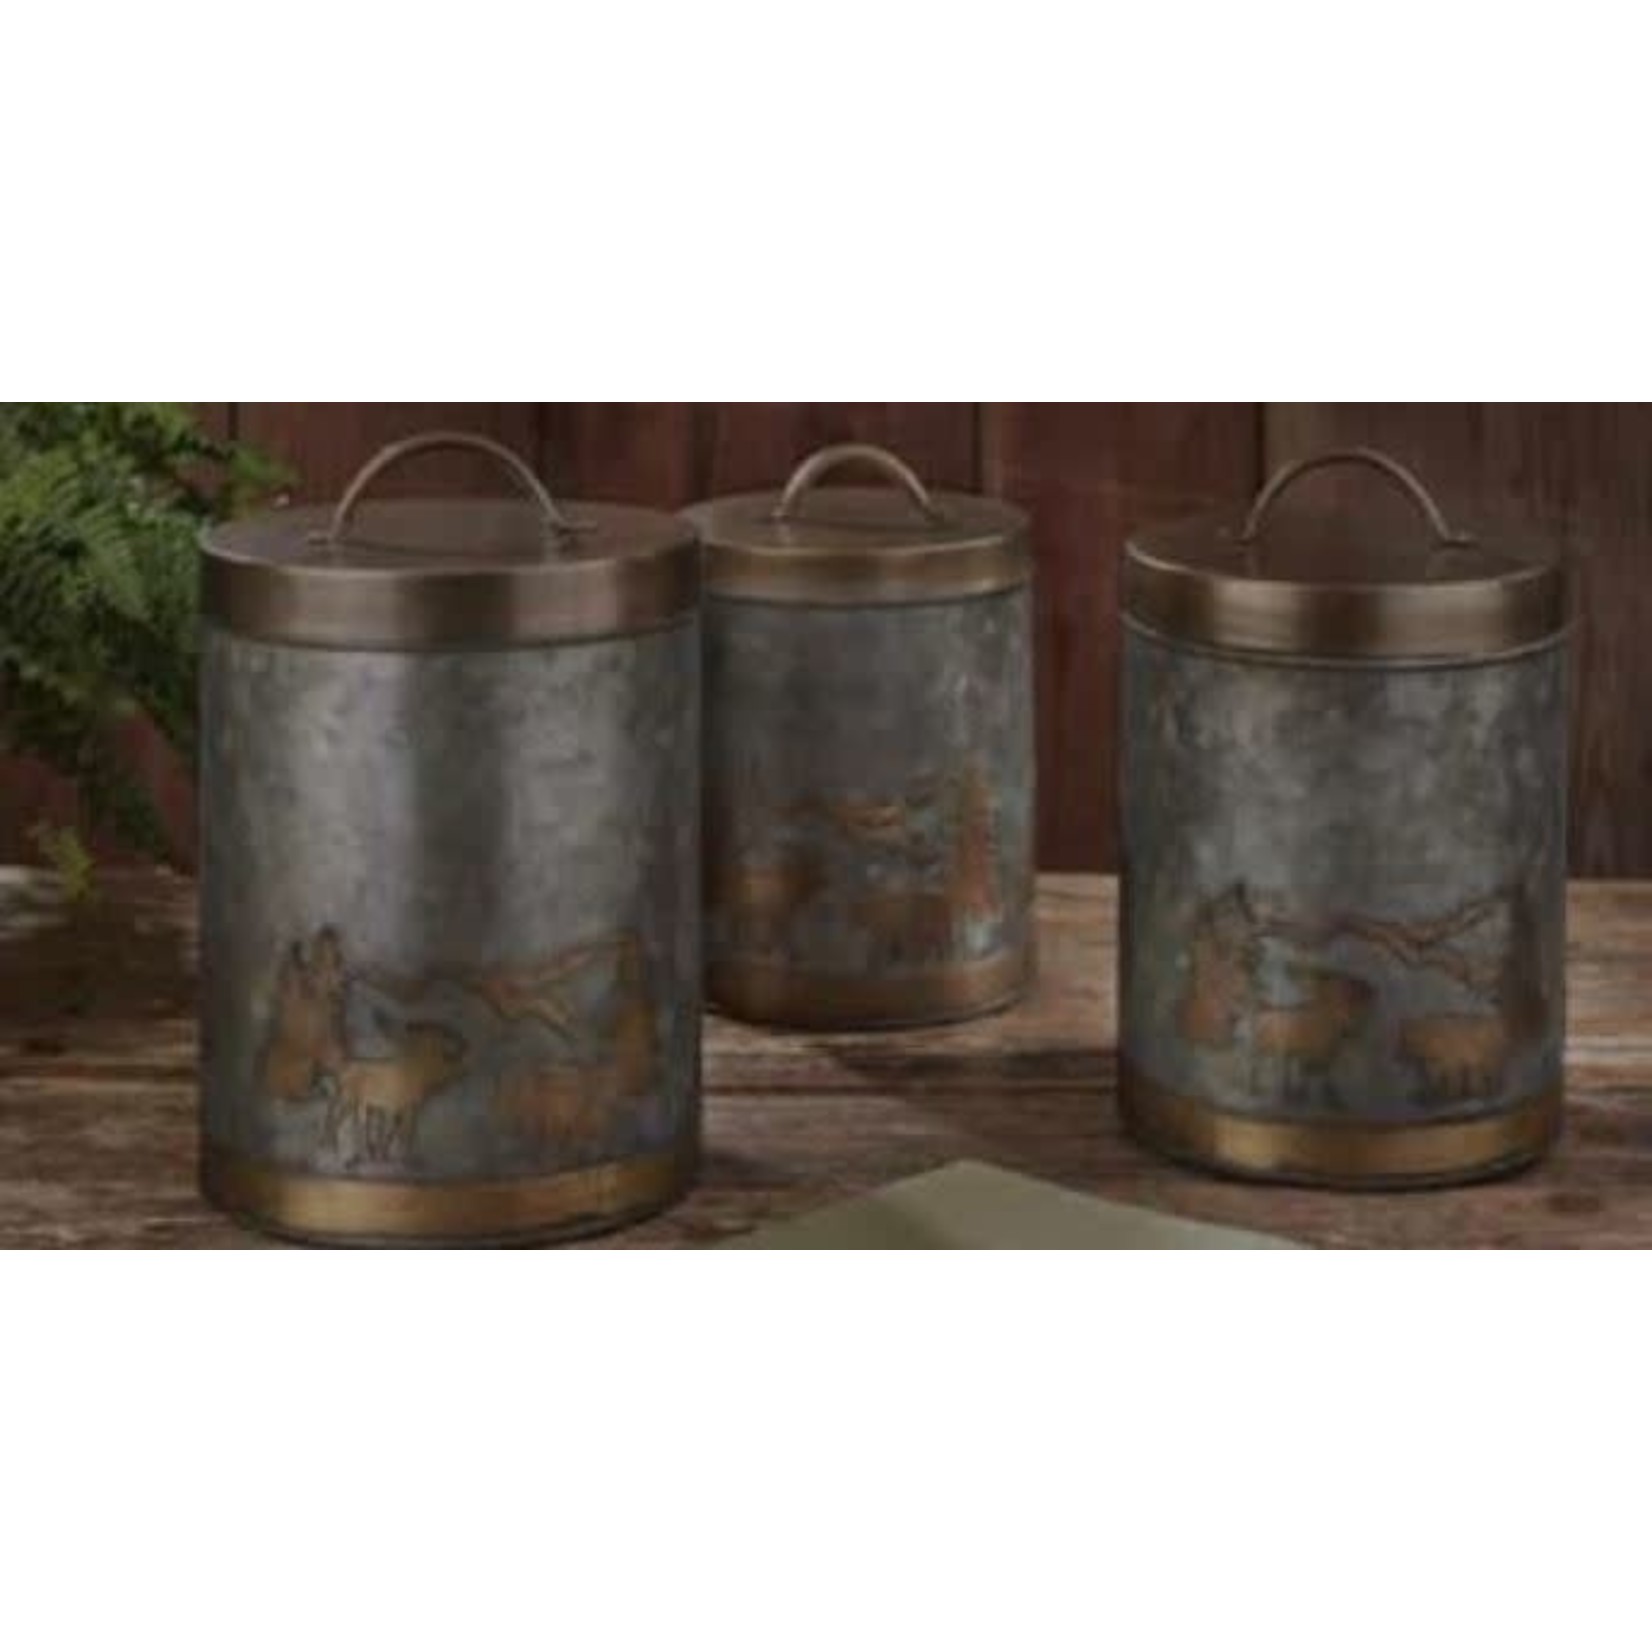 Foresters canister set of 3